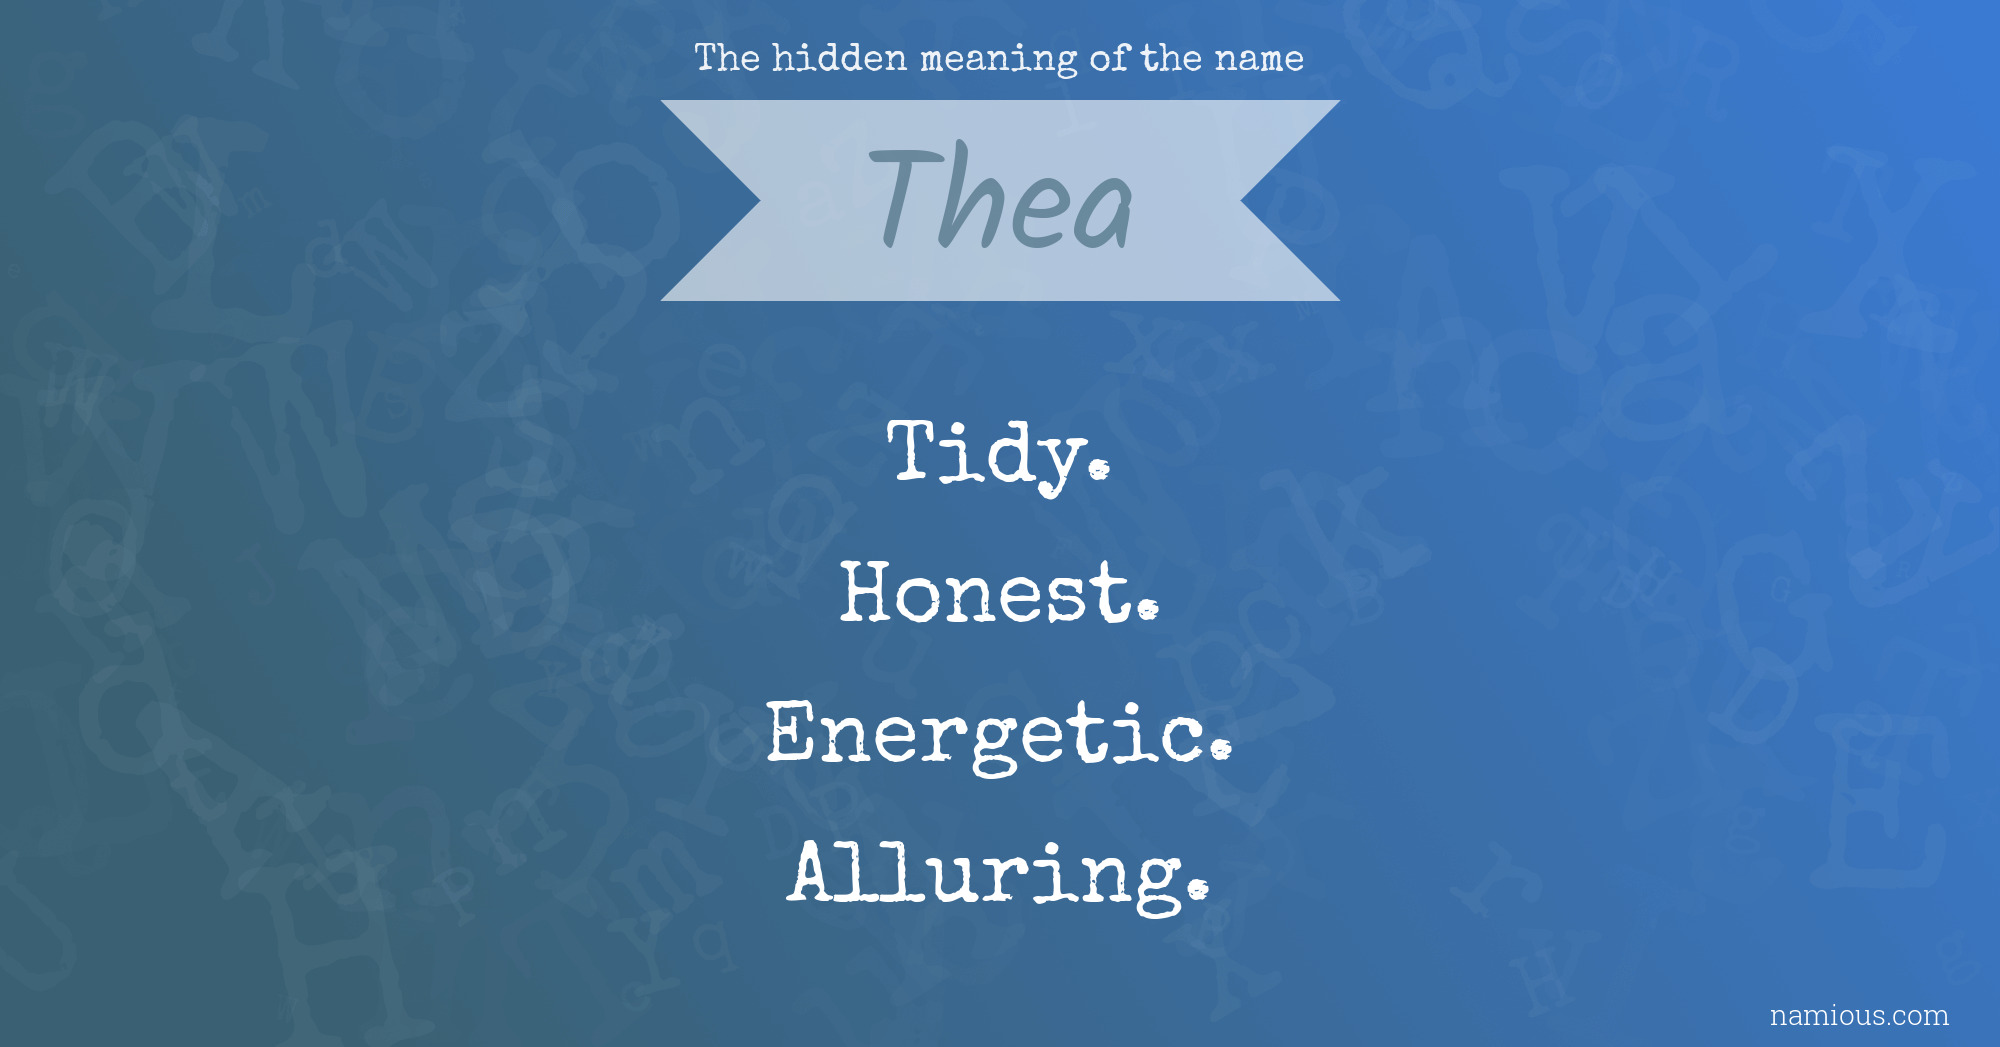 The hidden meaning of the name Thea